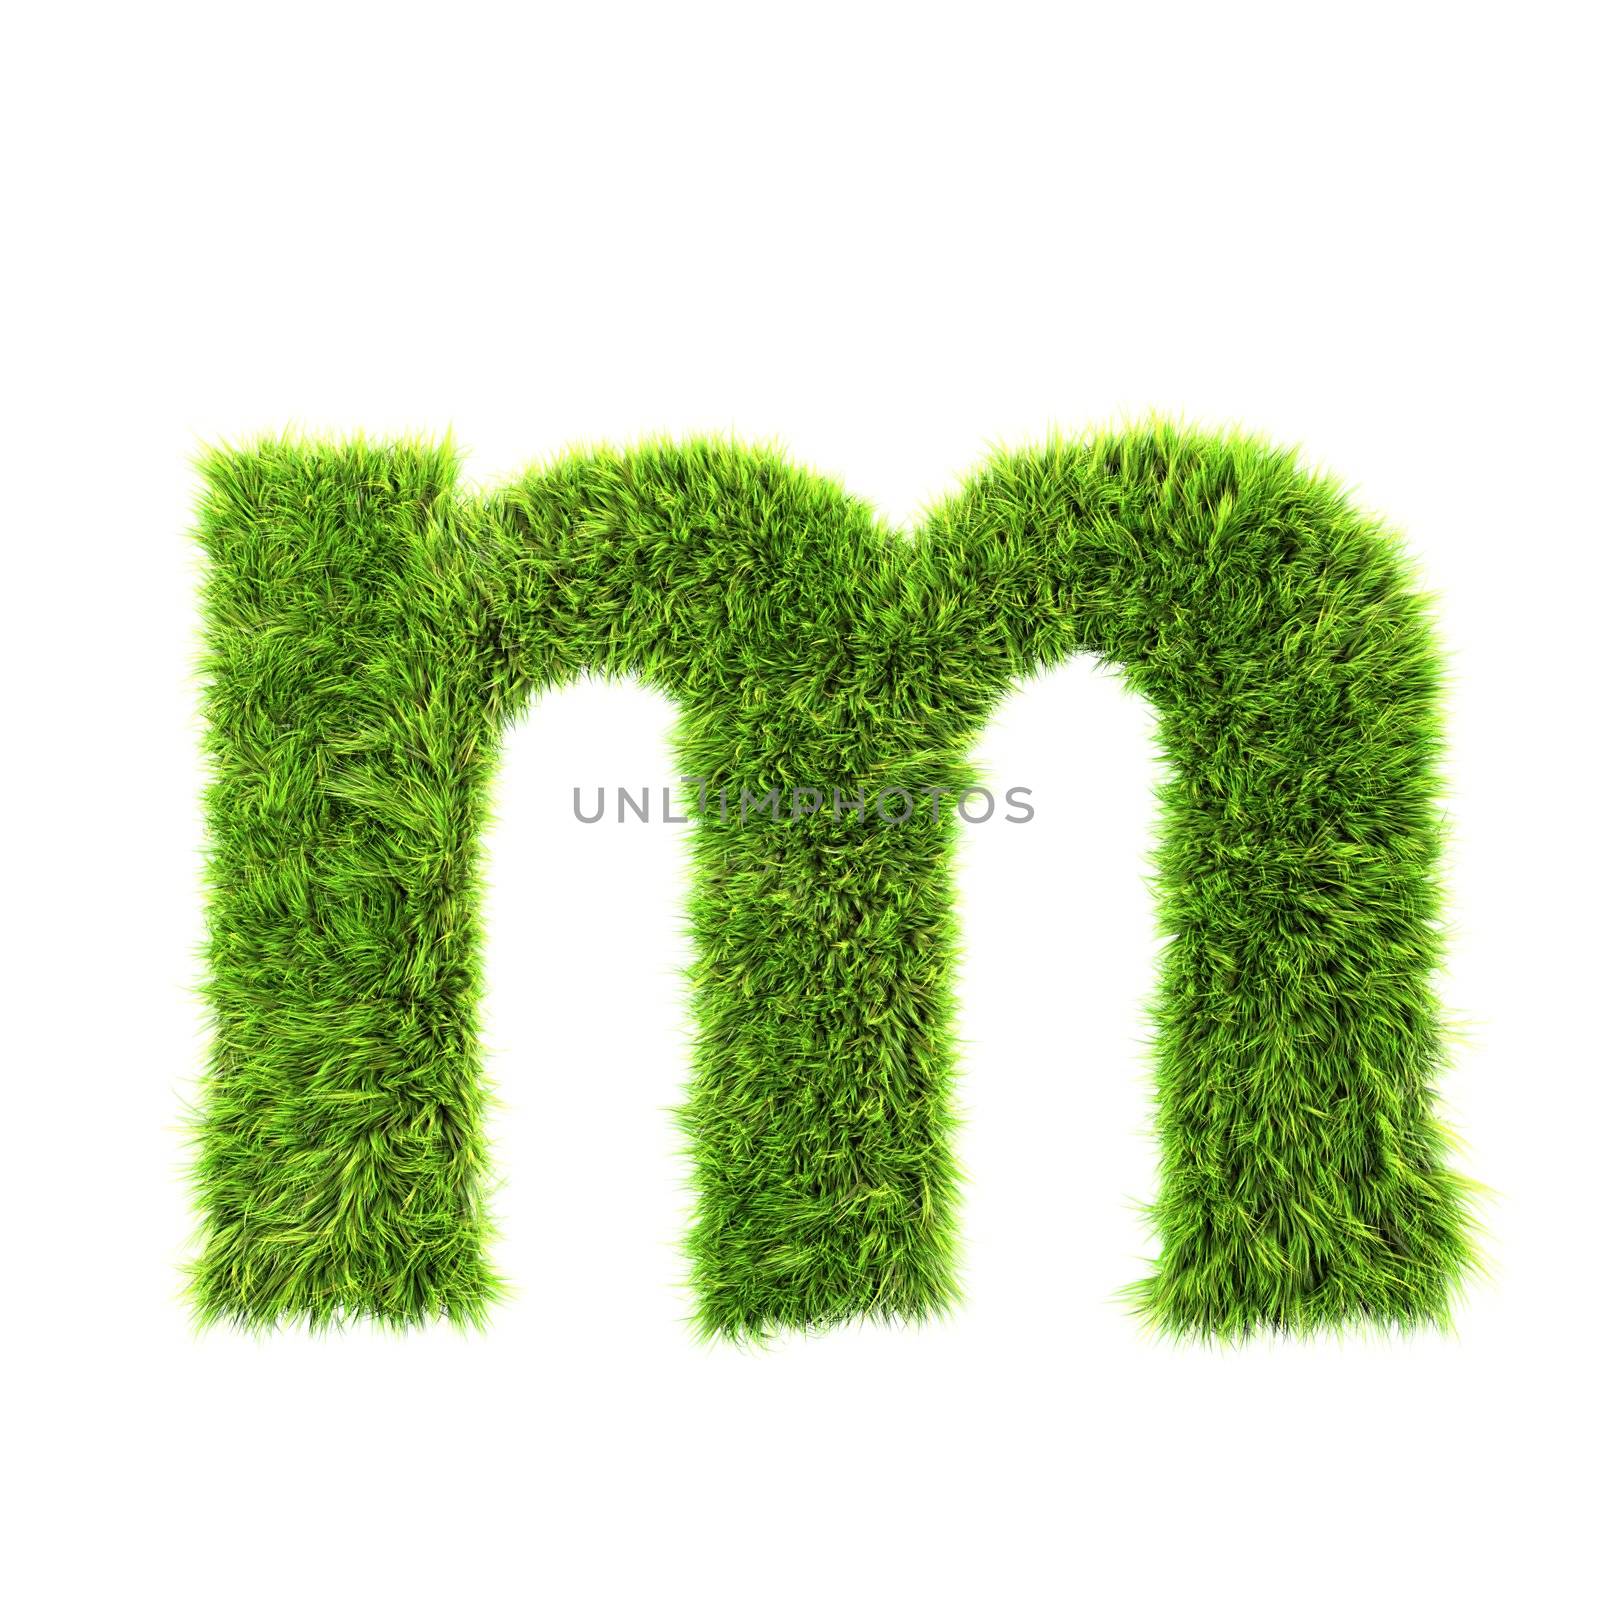 3d grass letter isolated on white background - m by chrisroll